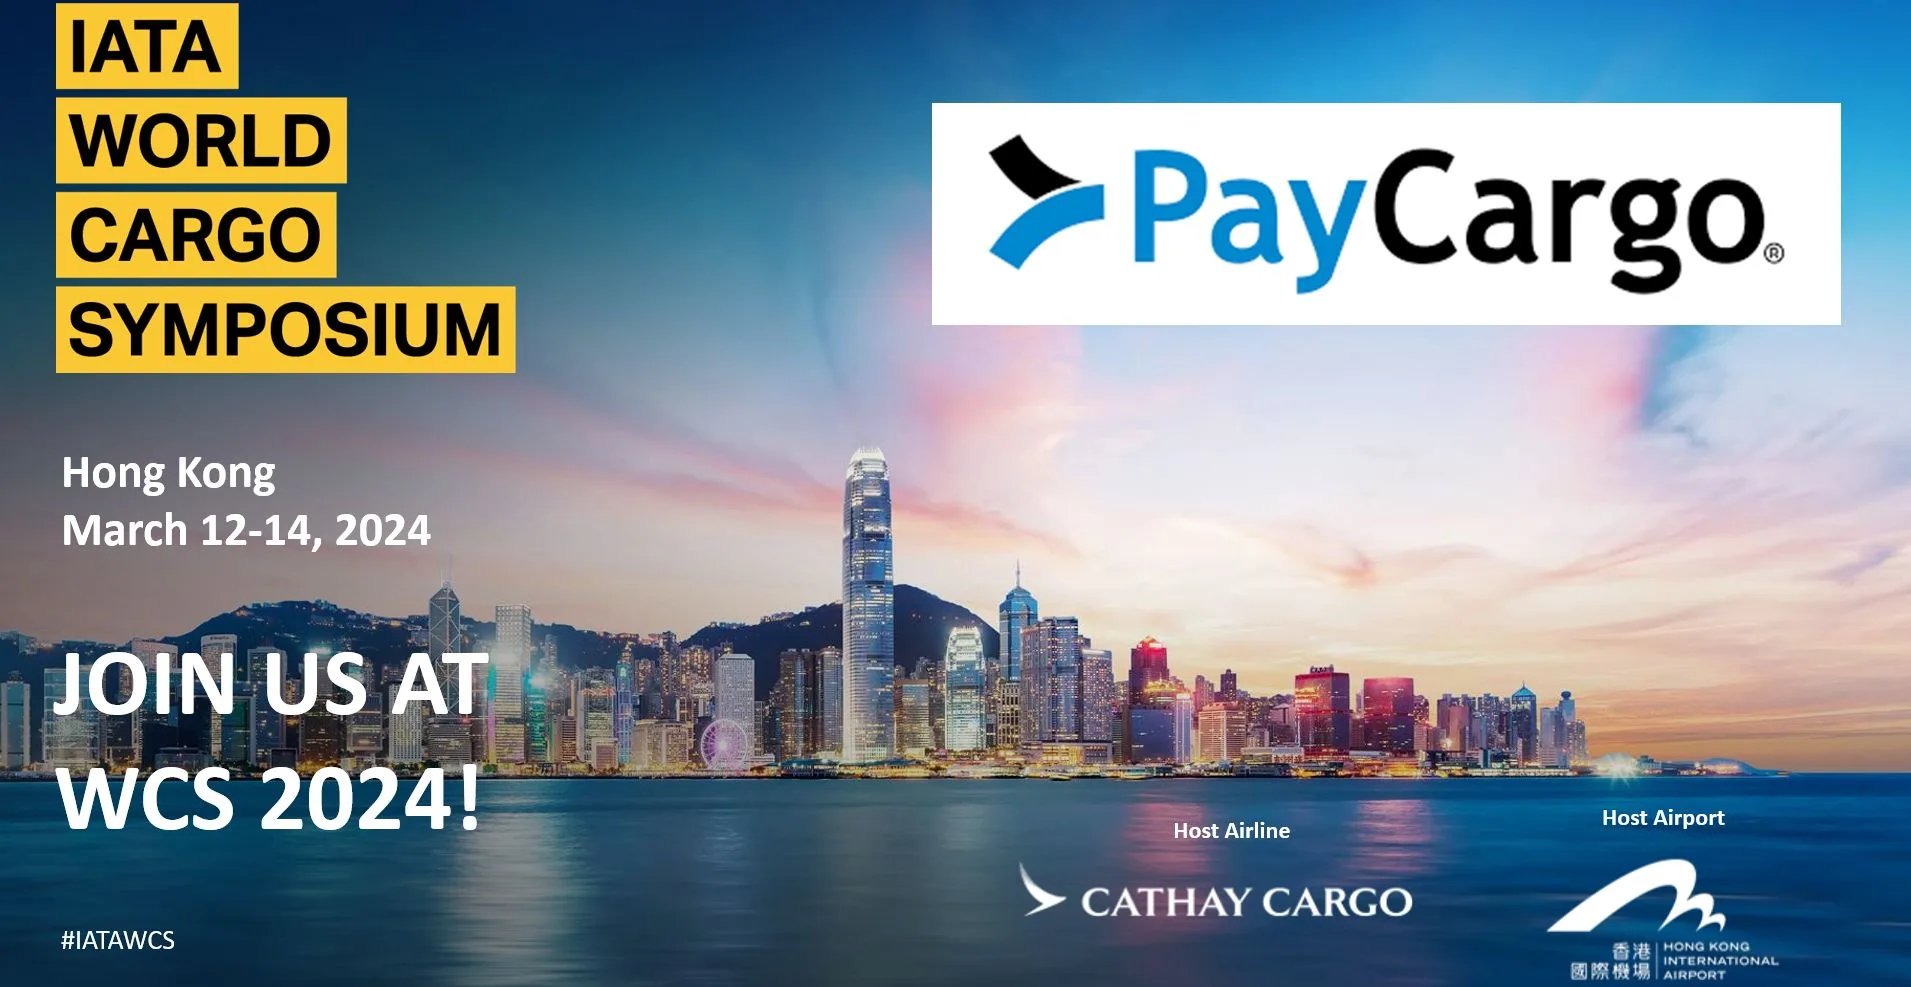 Explore the future of freight payments at the IATA World Cargo Symposium in Hong Kong! Visit Cathay Cargo Terminal's booth featuring PayCargo's Self-Service Payment Kiosk. Engage with PayCargo experts Mr. Michael White, Mr. Morgan Law, and Mr. Ryan Ngan to learn more about PayCargo services.